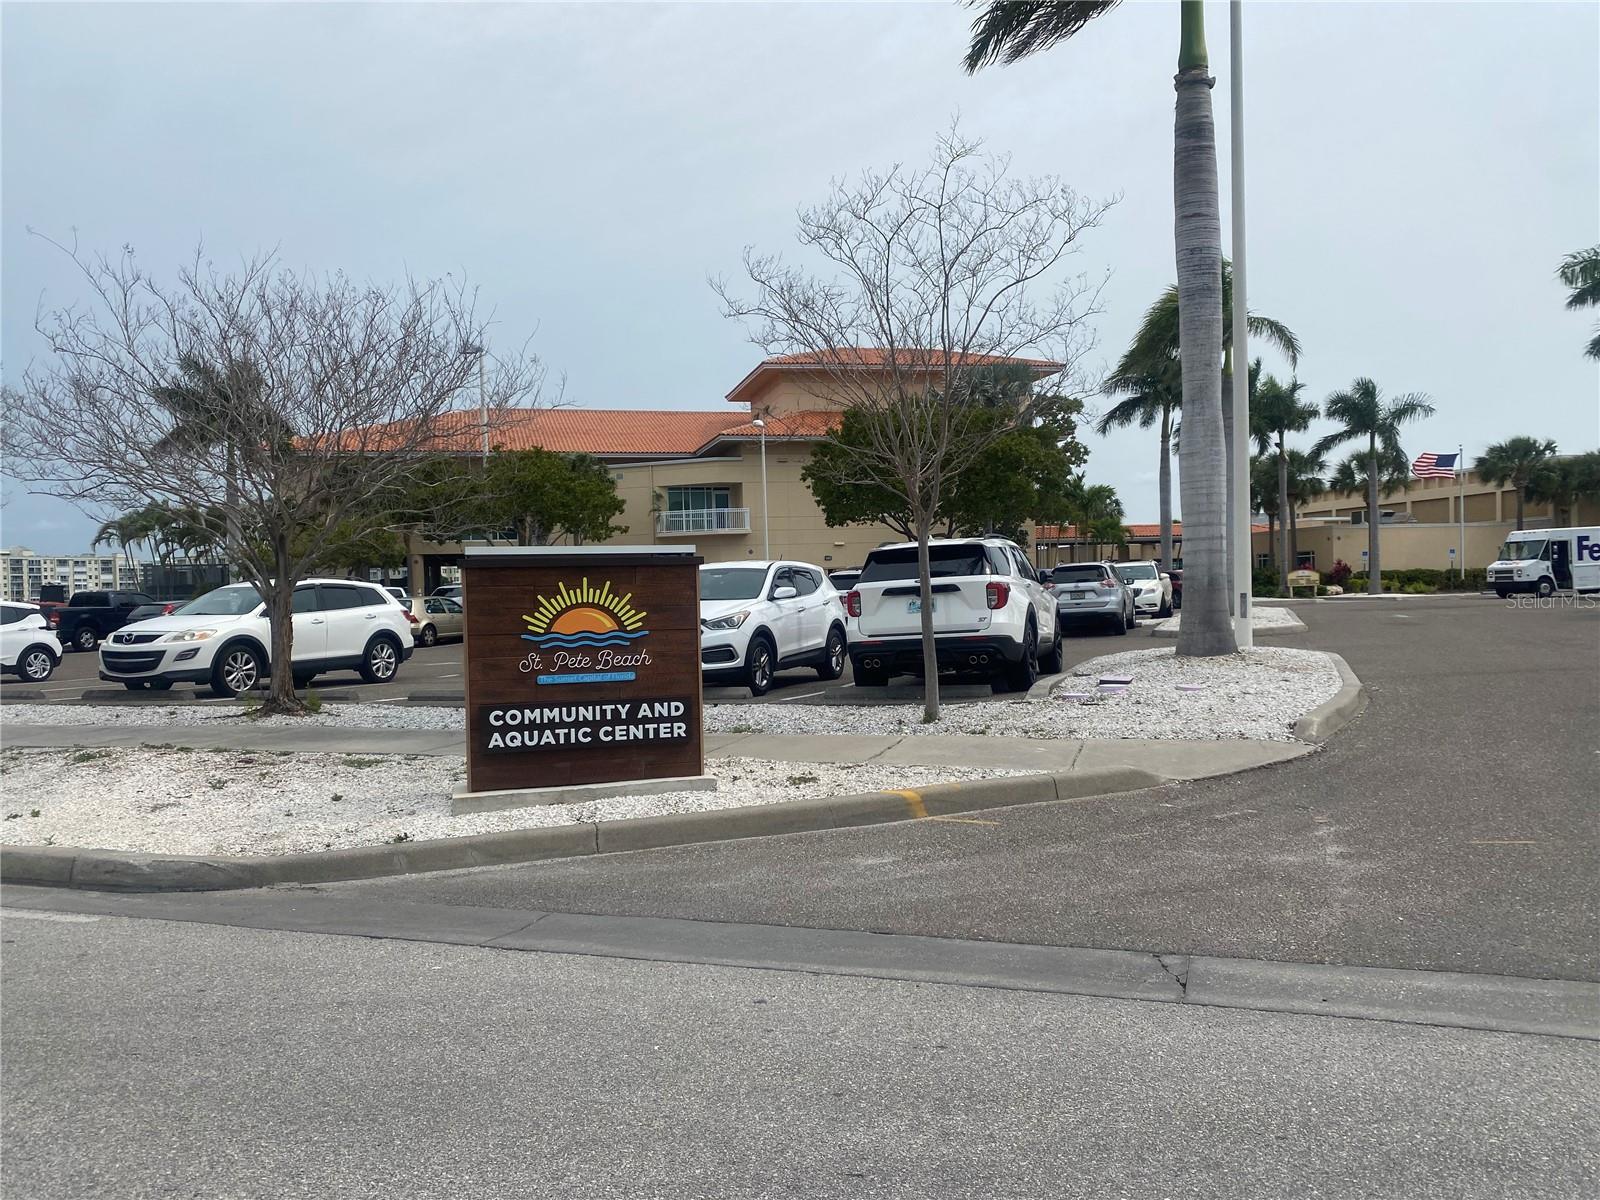 The St Pete Beach Community & Aquatic center is a few hundred feet away from the condo. Plenty of classes available for low cost.